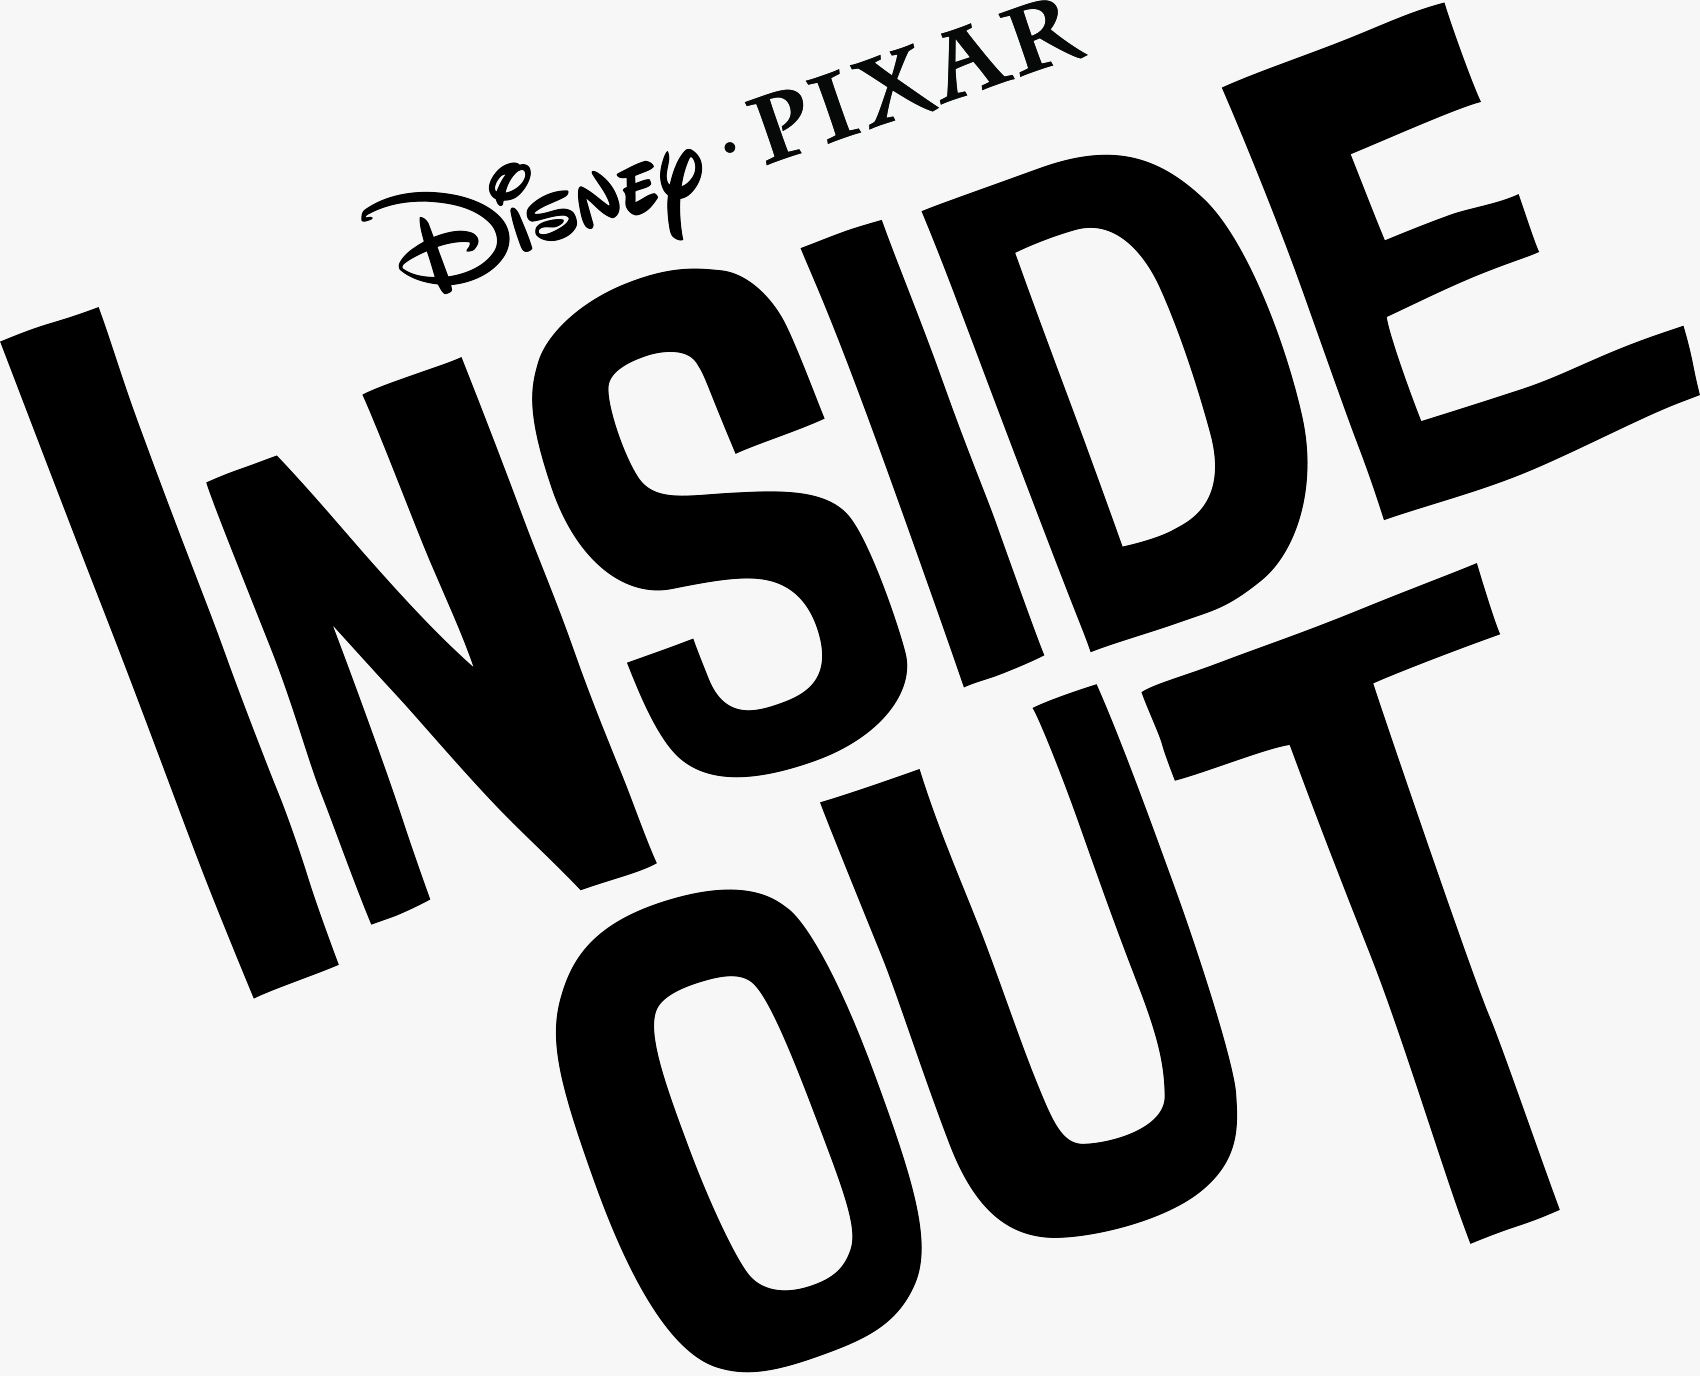 Inside Out Title Treatment